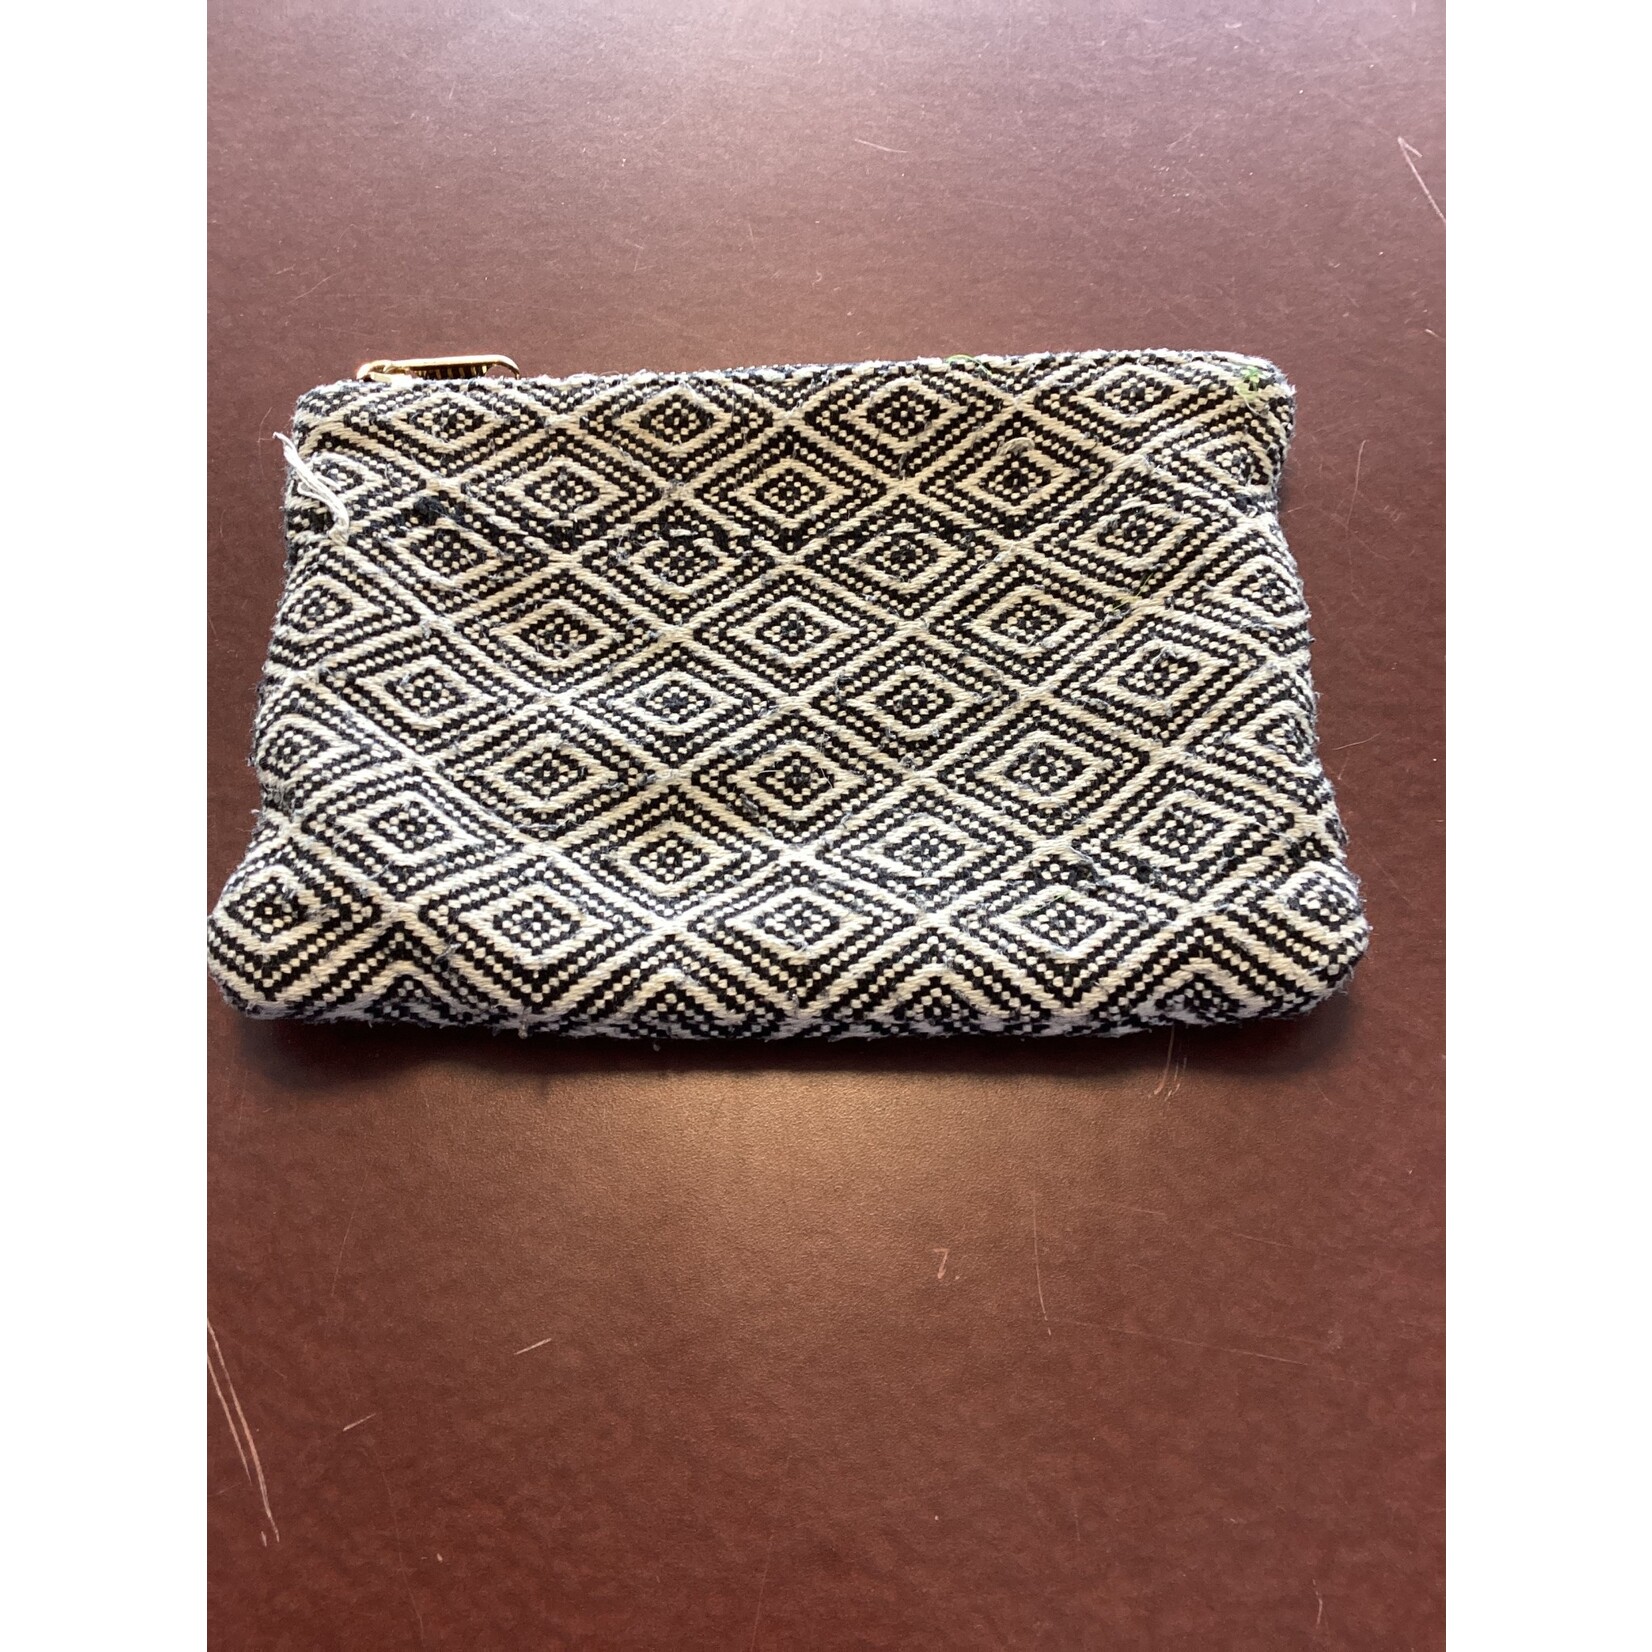 Patterned Cosmetic Pouch